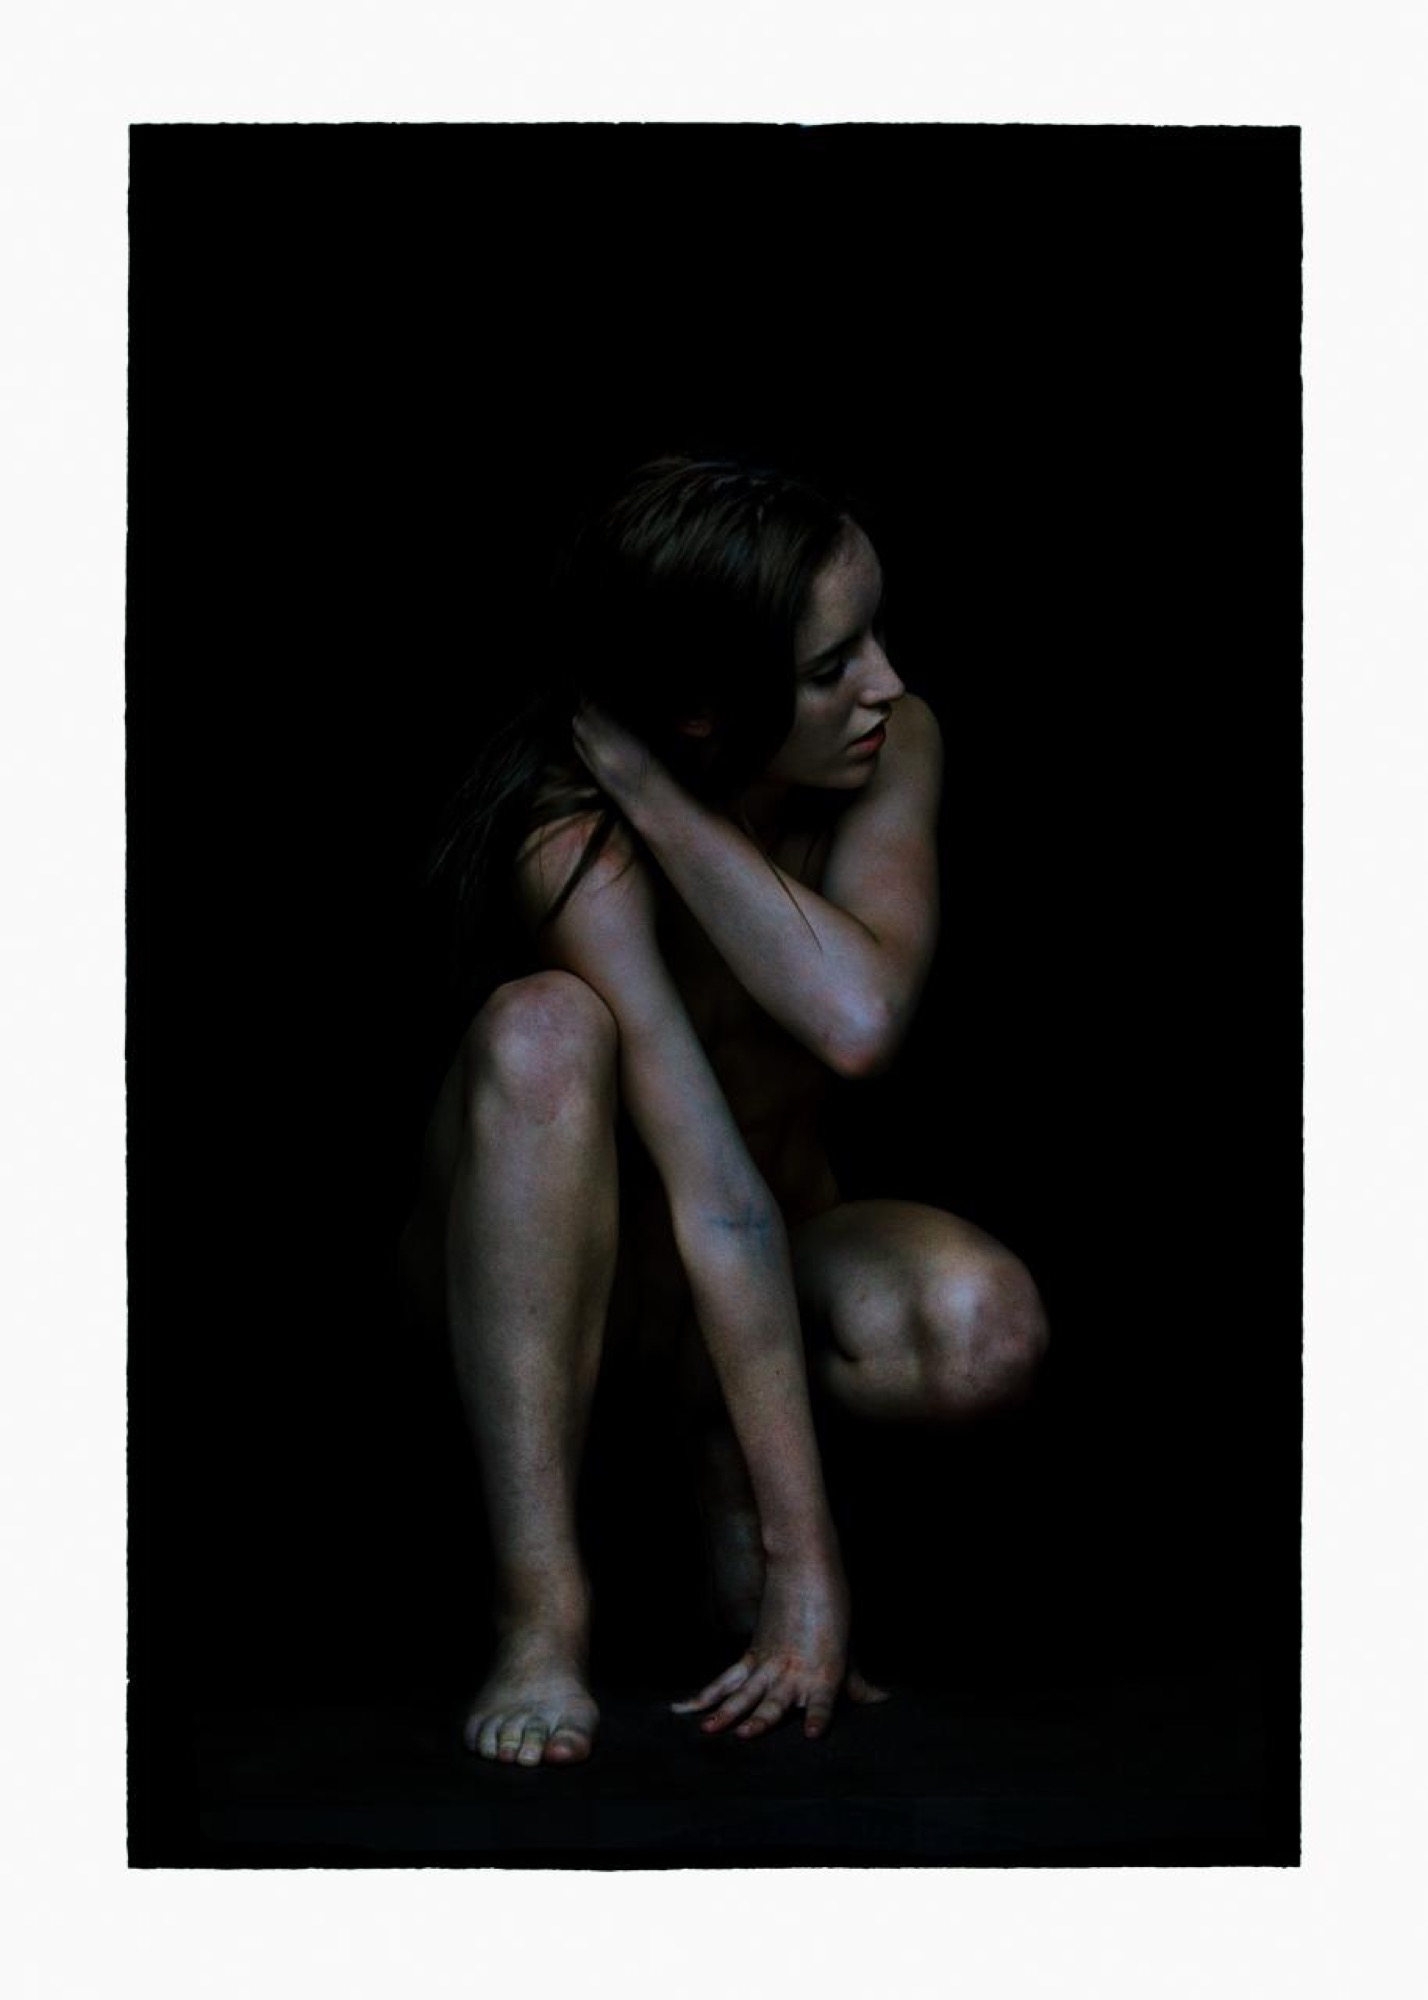 Bill Henson, <em>Untitled</em>, inkjet print, 127.0 x 180.0 cm, artist’s proof 1, National Gallery of Victoria, Melbourne, Gift of William Donald Bowness through the Australian, Government’s Cultural Gifts Program, 2016.